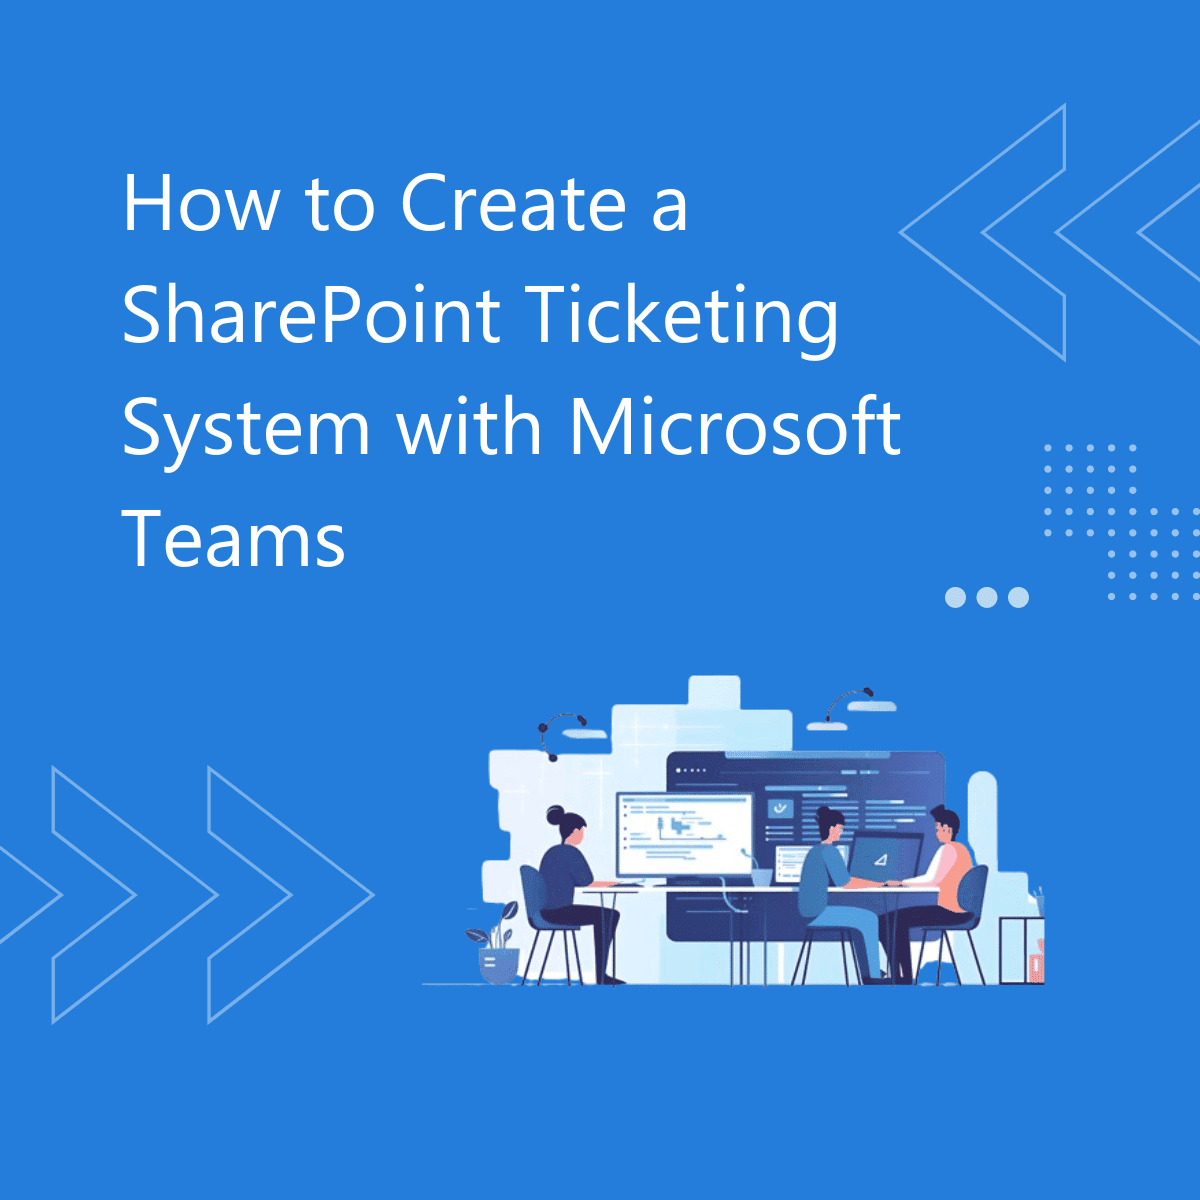 How to create SharePoint Ticketing System with Microsoft Teams